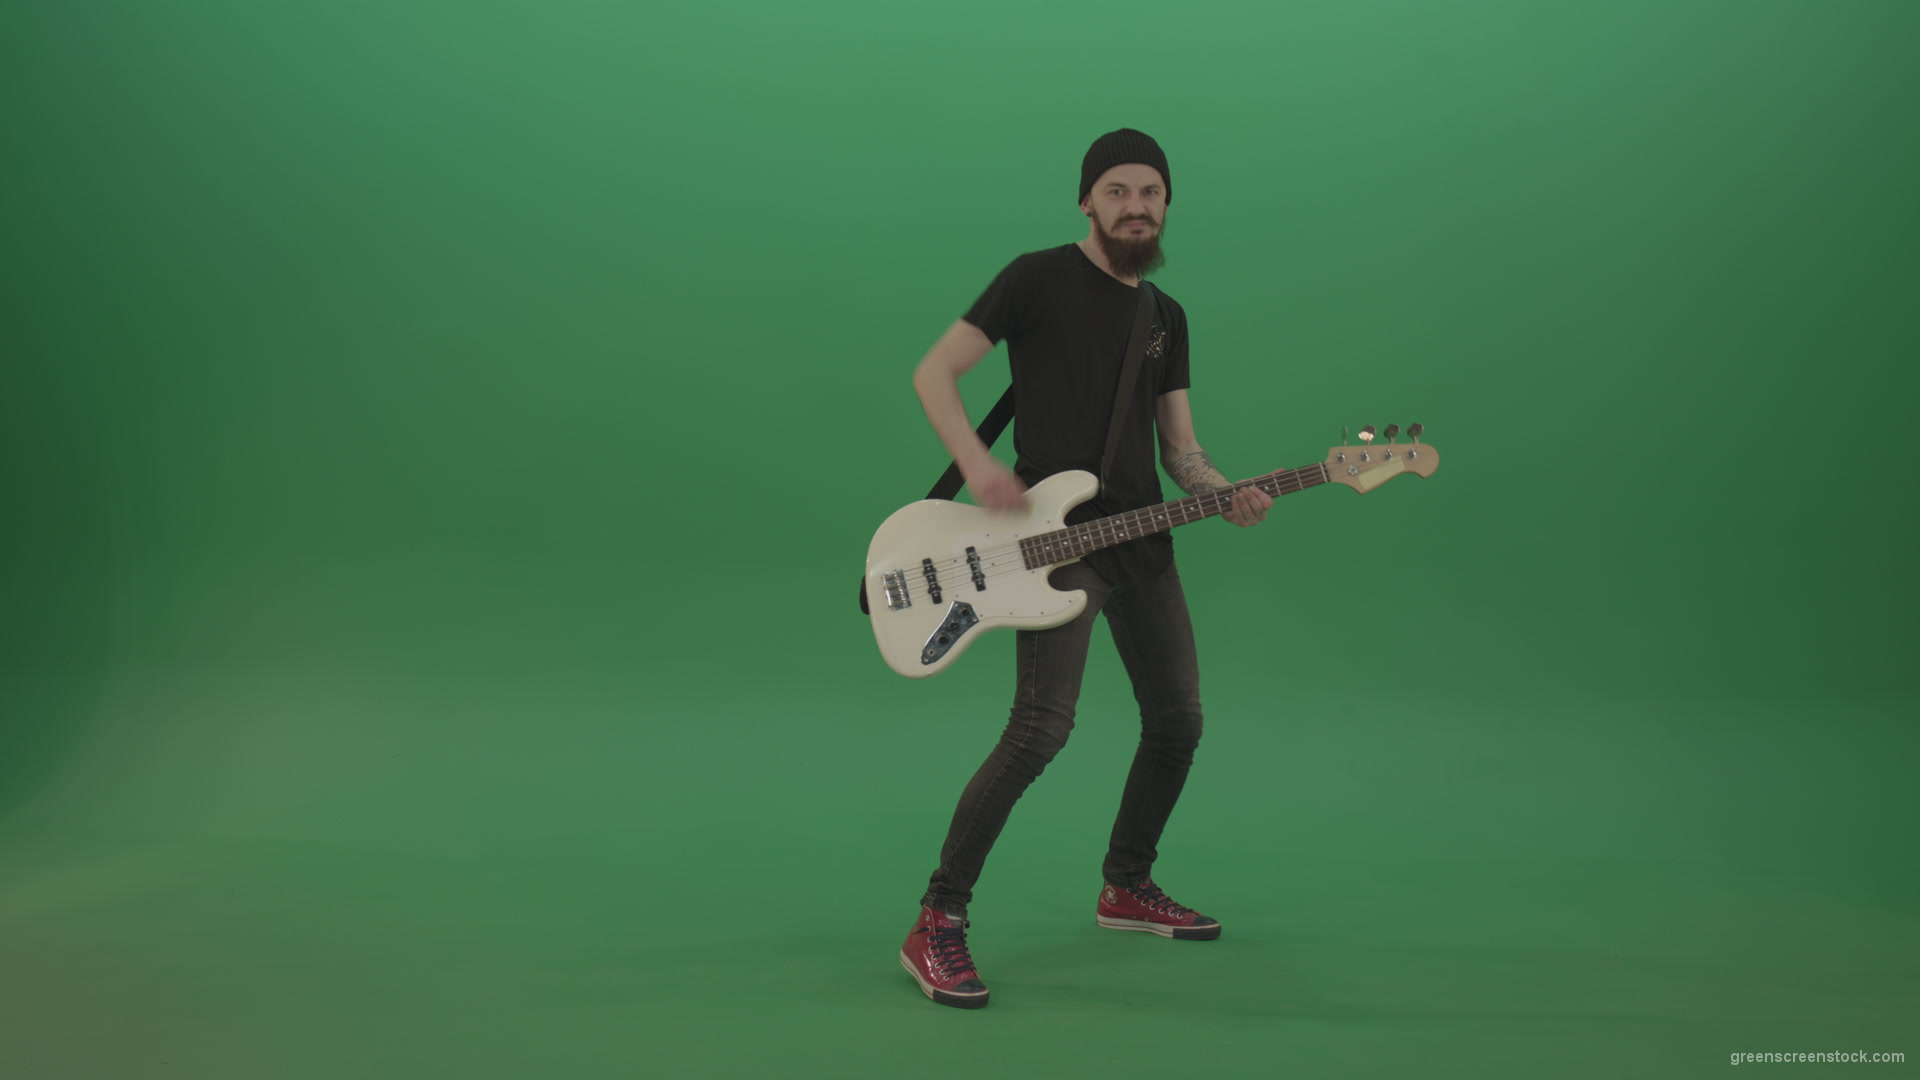 Man-play-music-instrument-bass-guitar-isolated-on-green-screen_007 Green Screen Stock